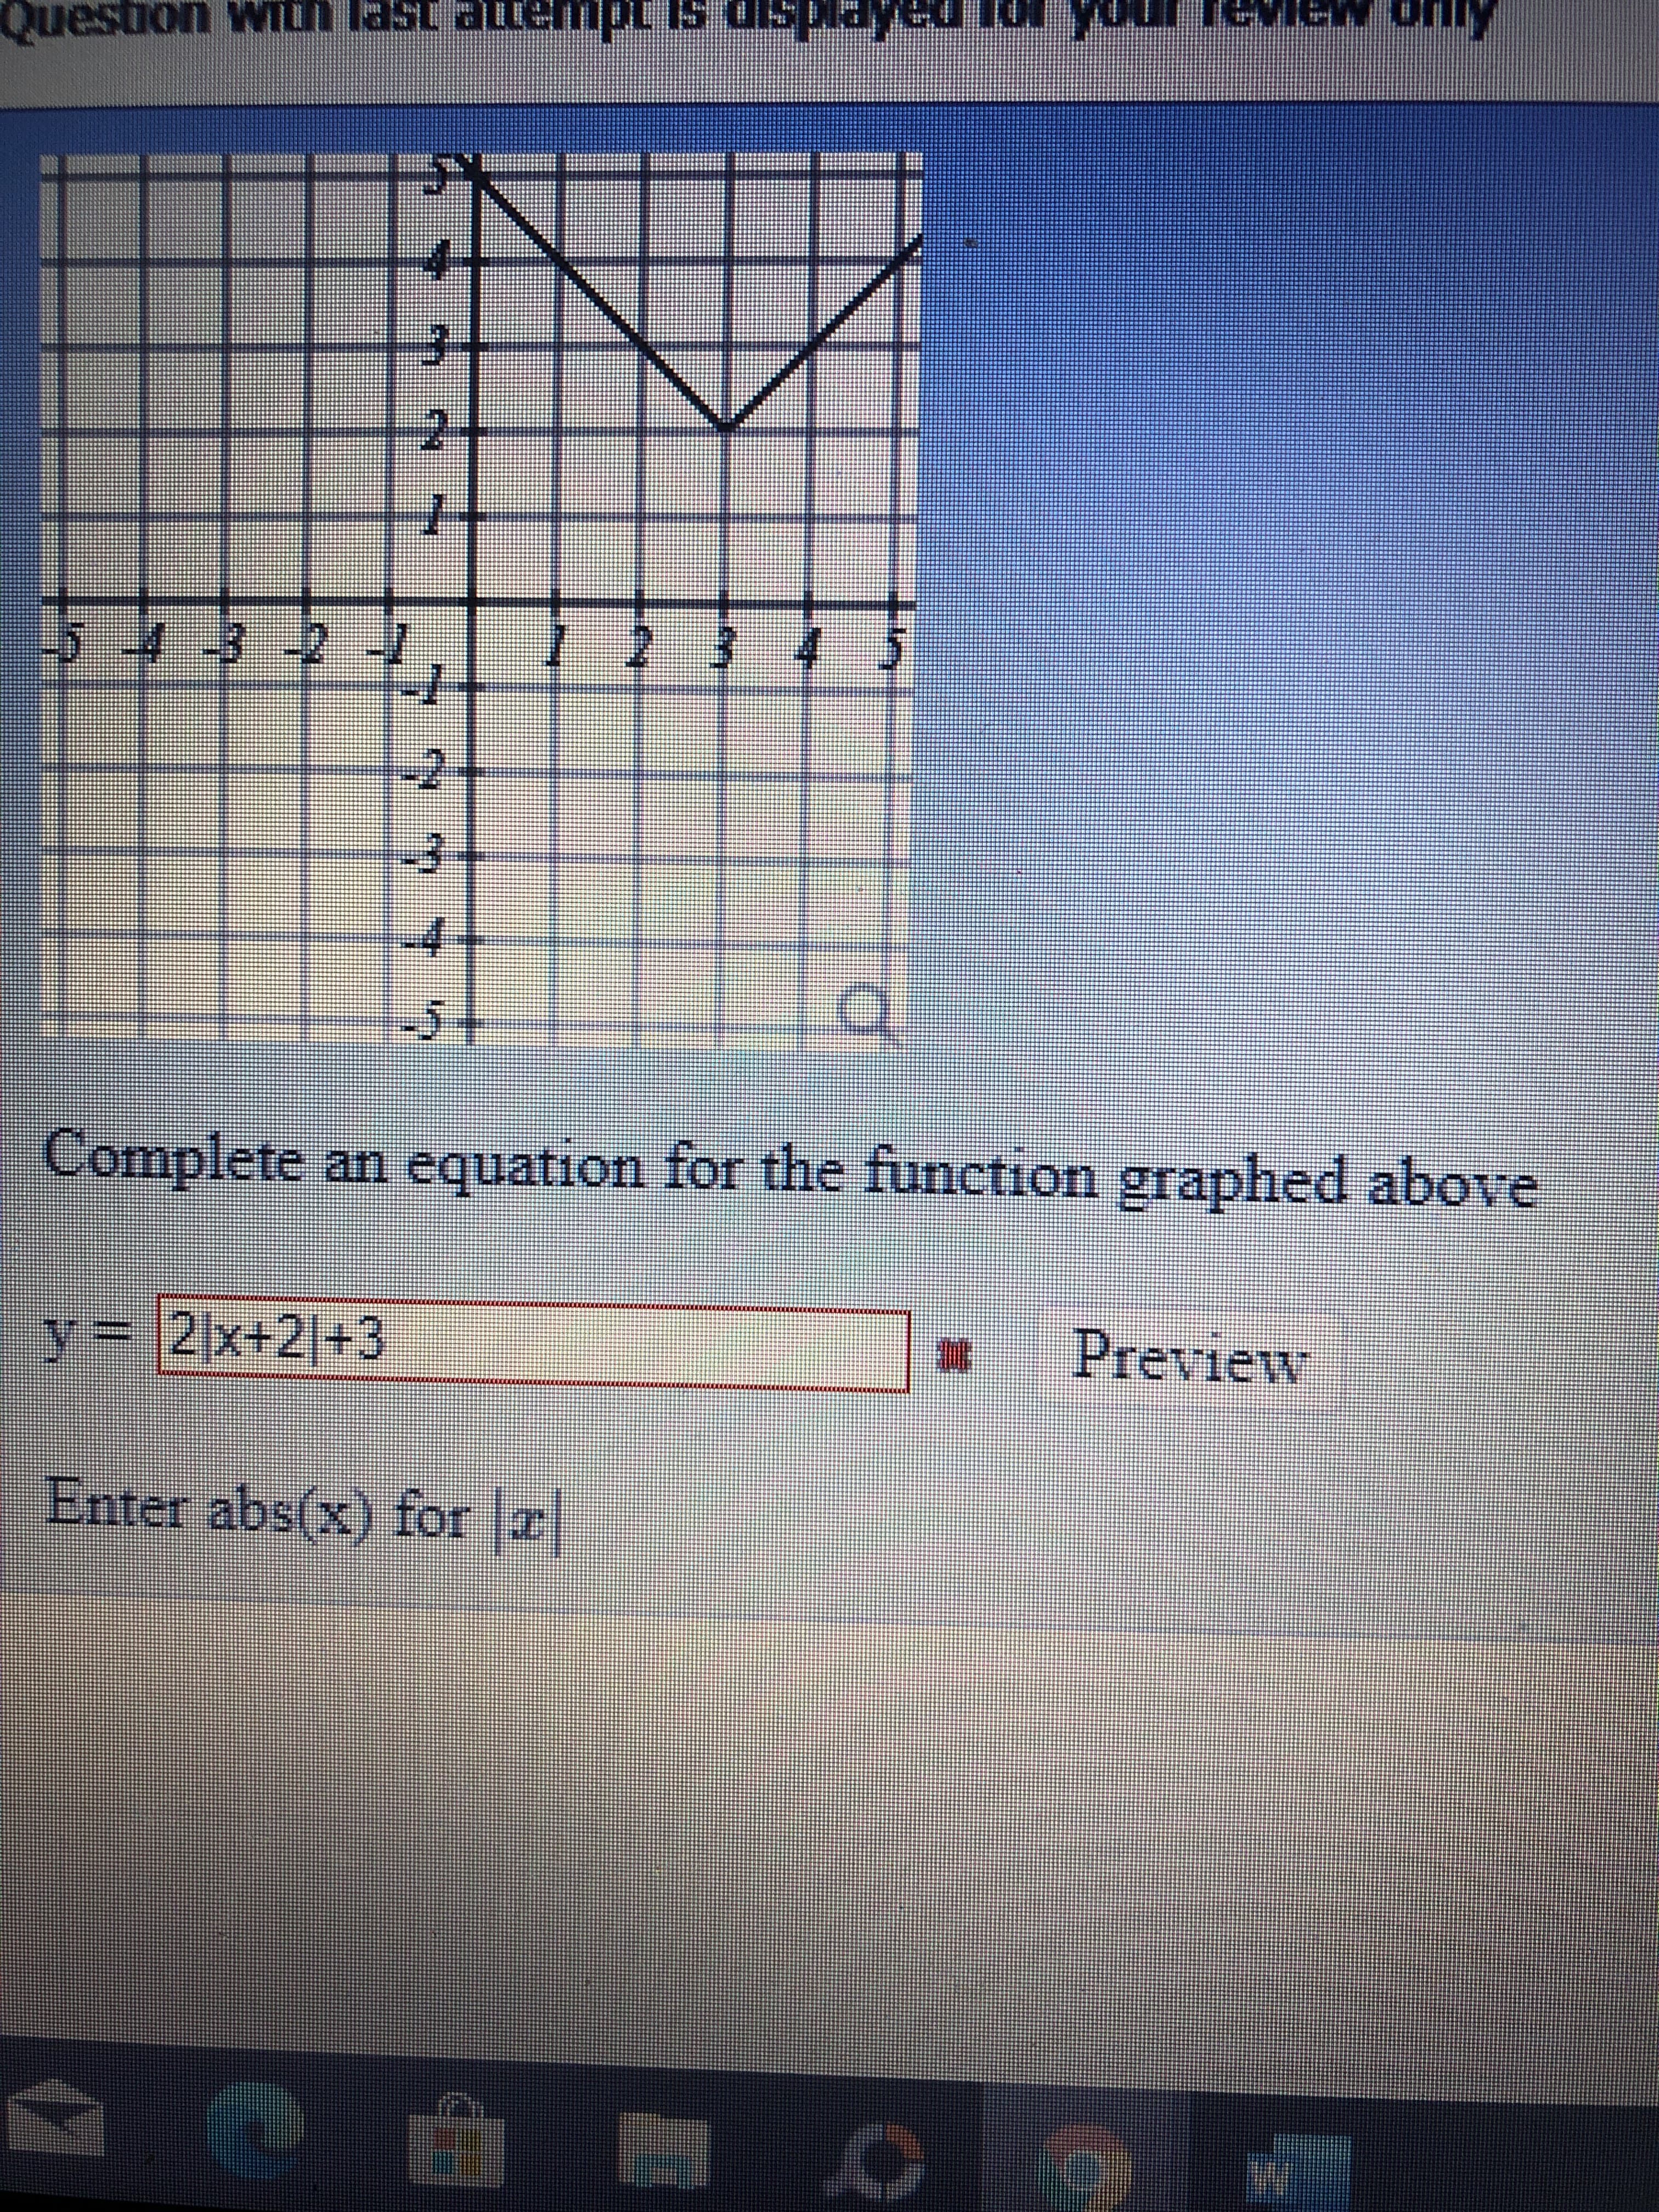 Complete an
equation for the function graphed above
